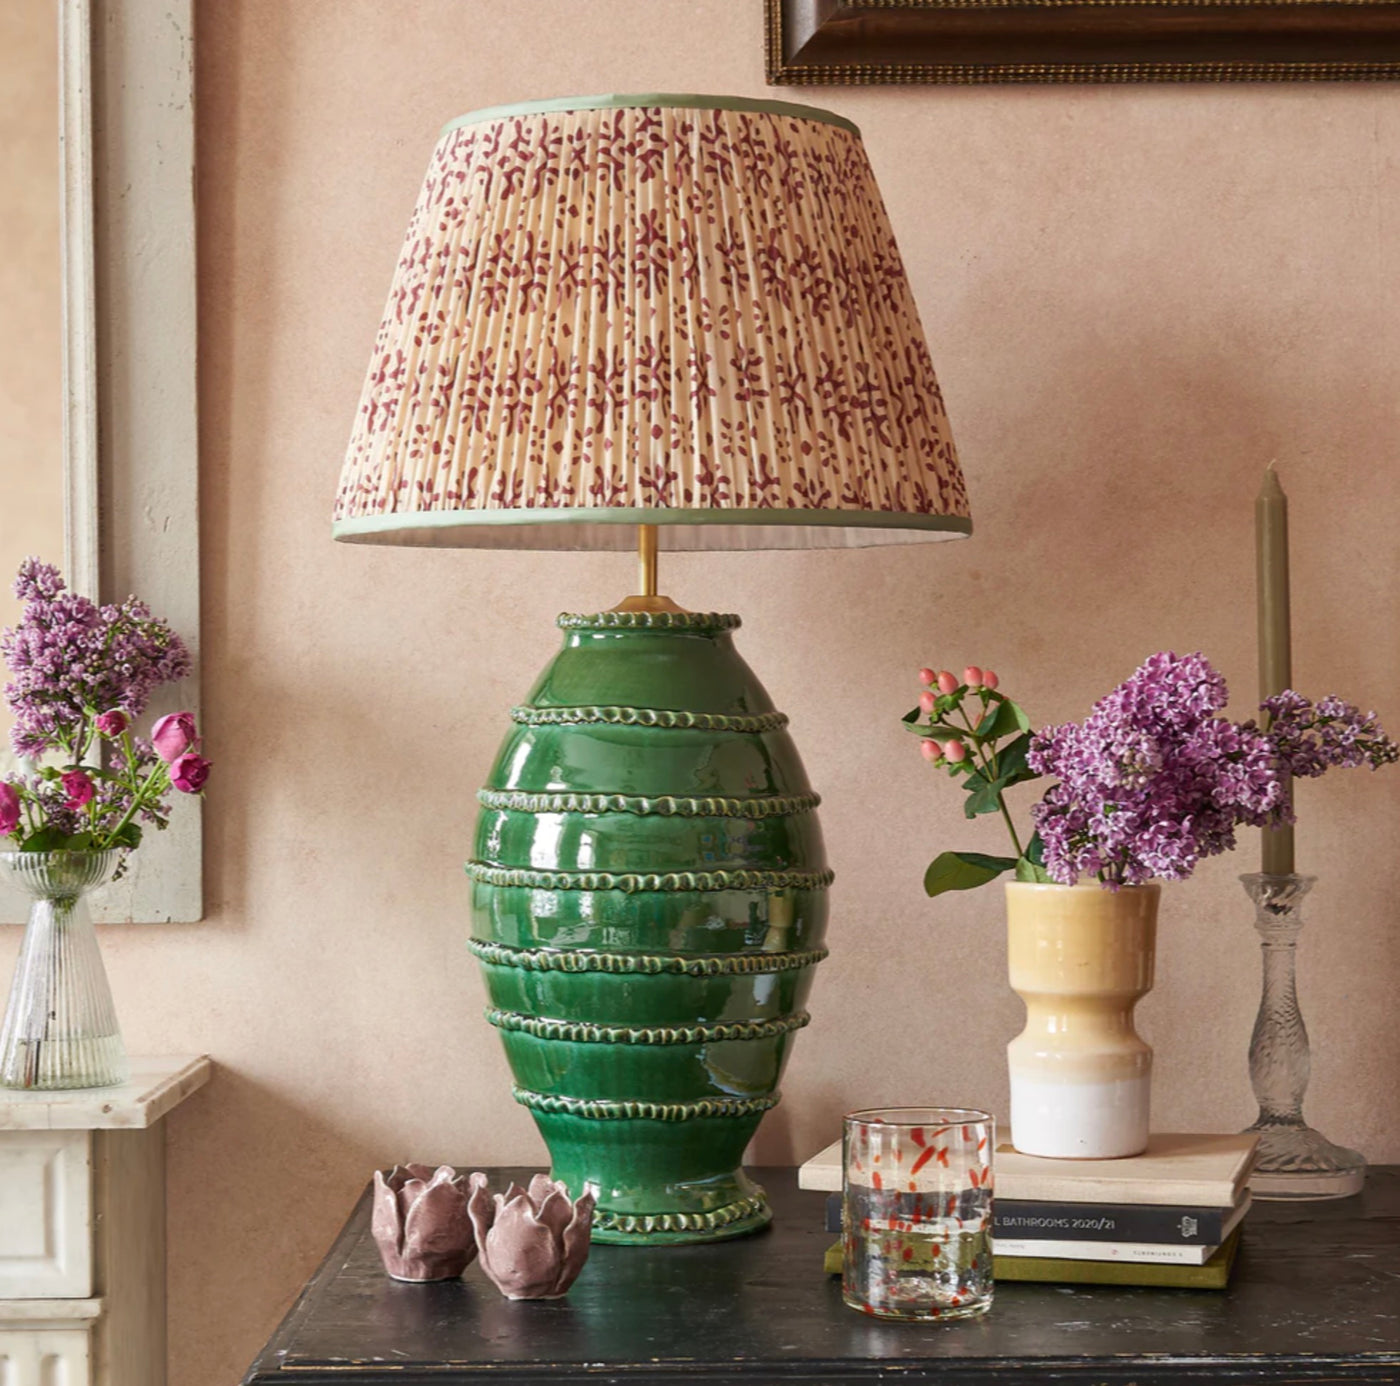 Green Wiggle Ribbed Urn Ceramic Table Lamp by Penny Morrison | Newport Lamp And Shade | Located in Newport, RI